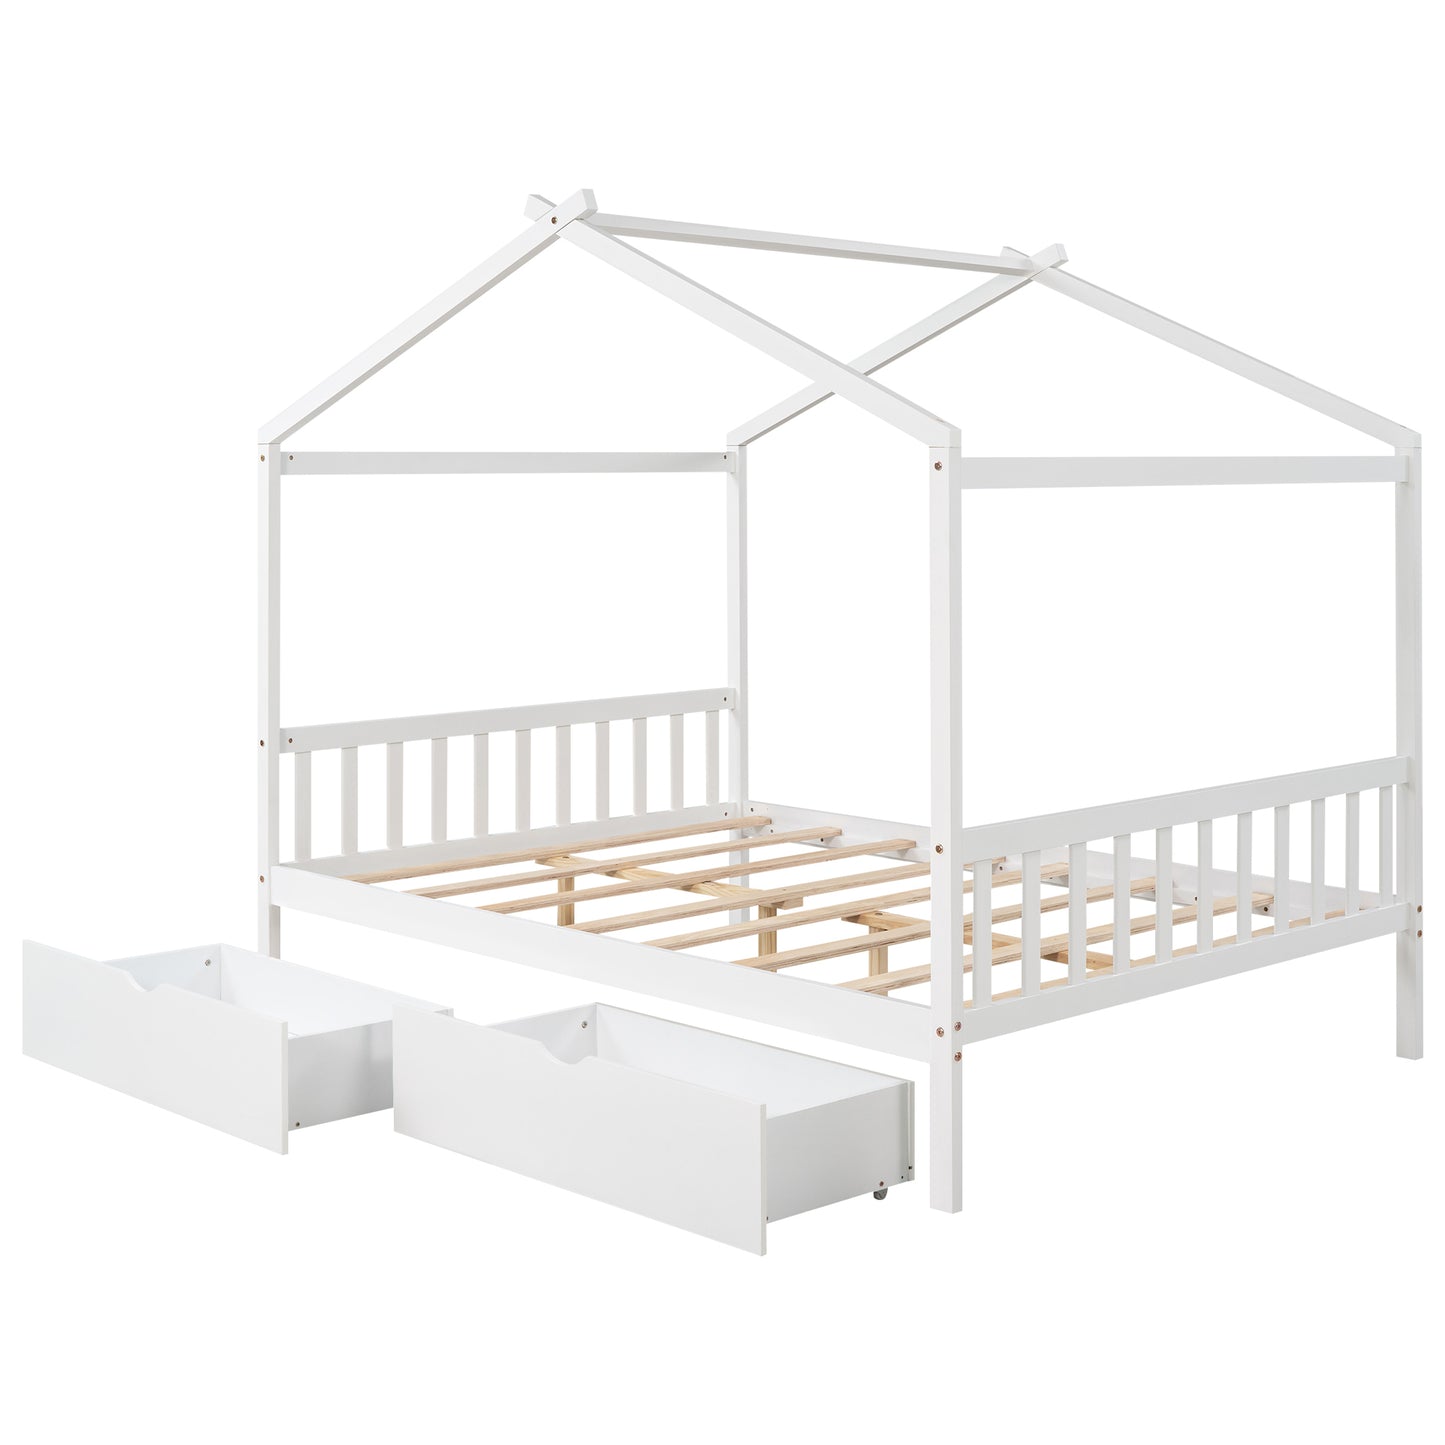 Full Size House Platform Bed with Two Drawers,Headboard and Footboard,Roof Design,White